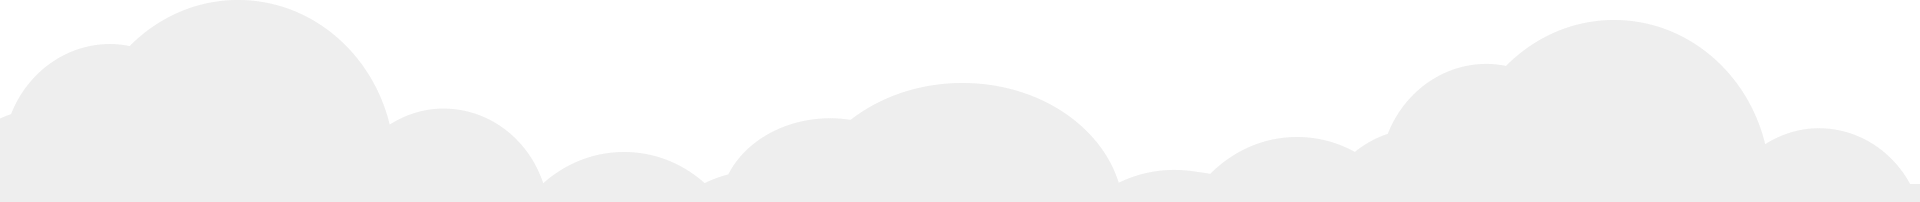 A green and white background with a circle in the middle.